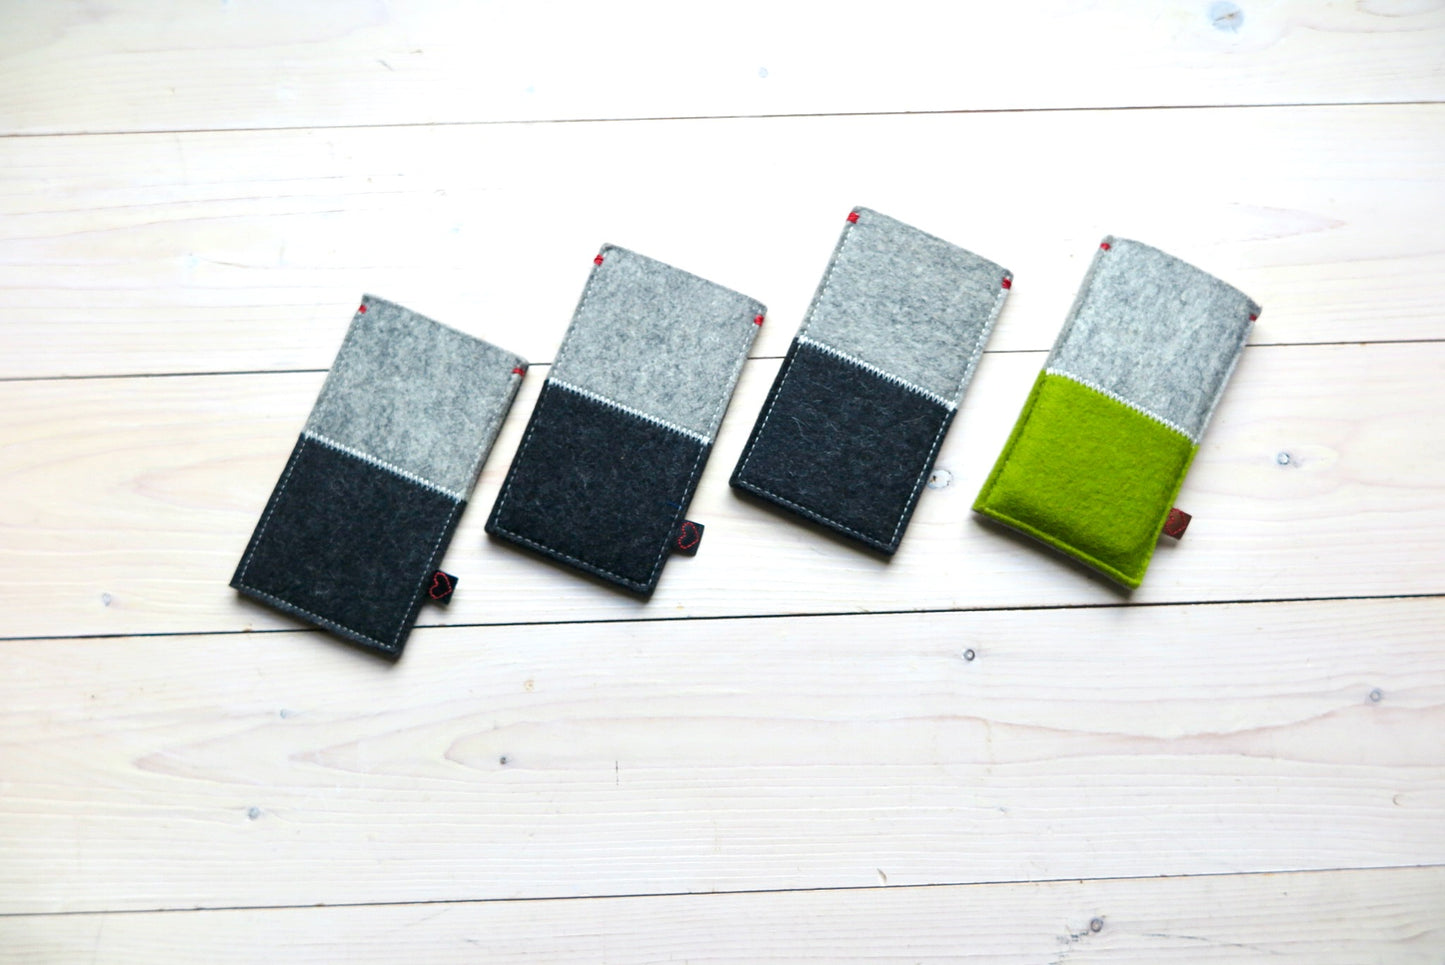 SALE - iPhone se covers felt, older model iPhone SE and iPhone 5s